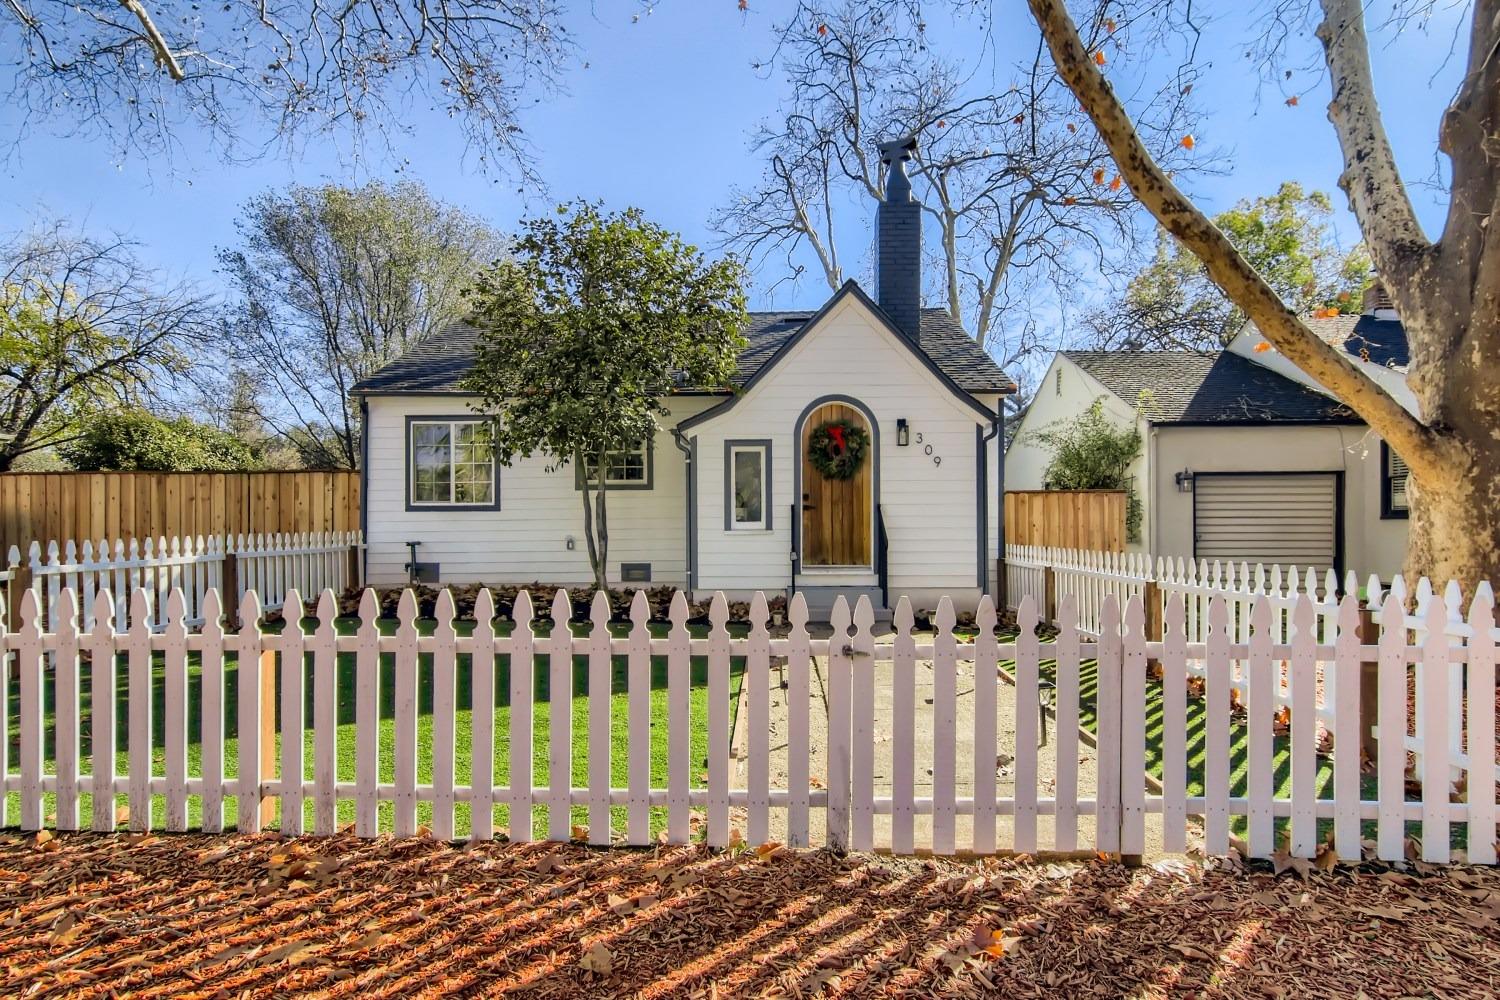 Come check out this fully remodeled home in the heart of the historic district of Folsom. Discover t